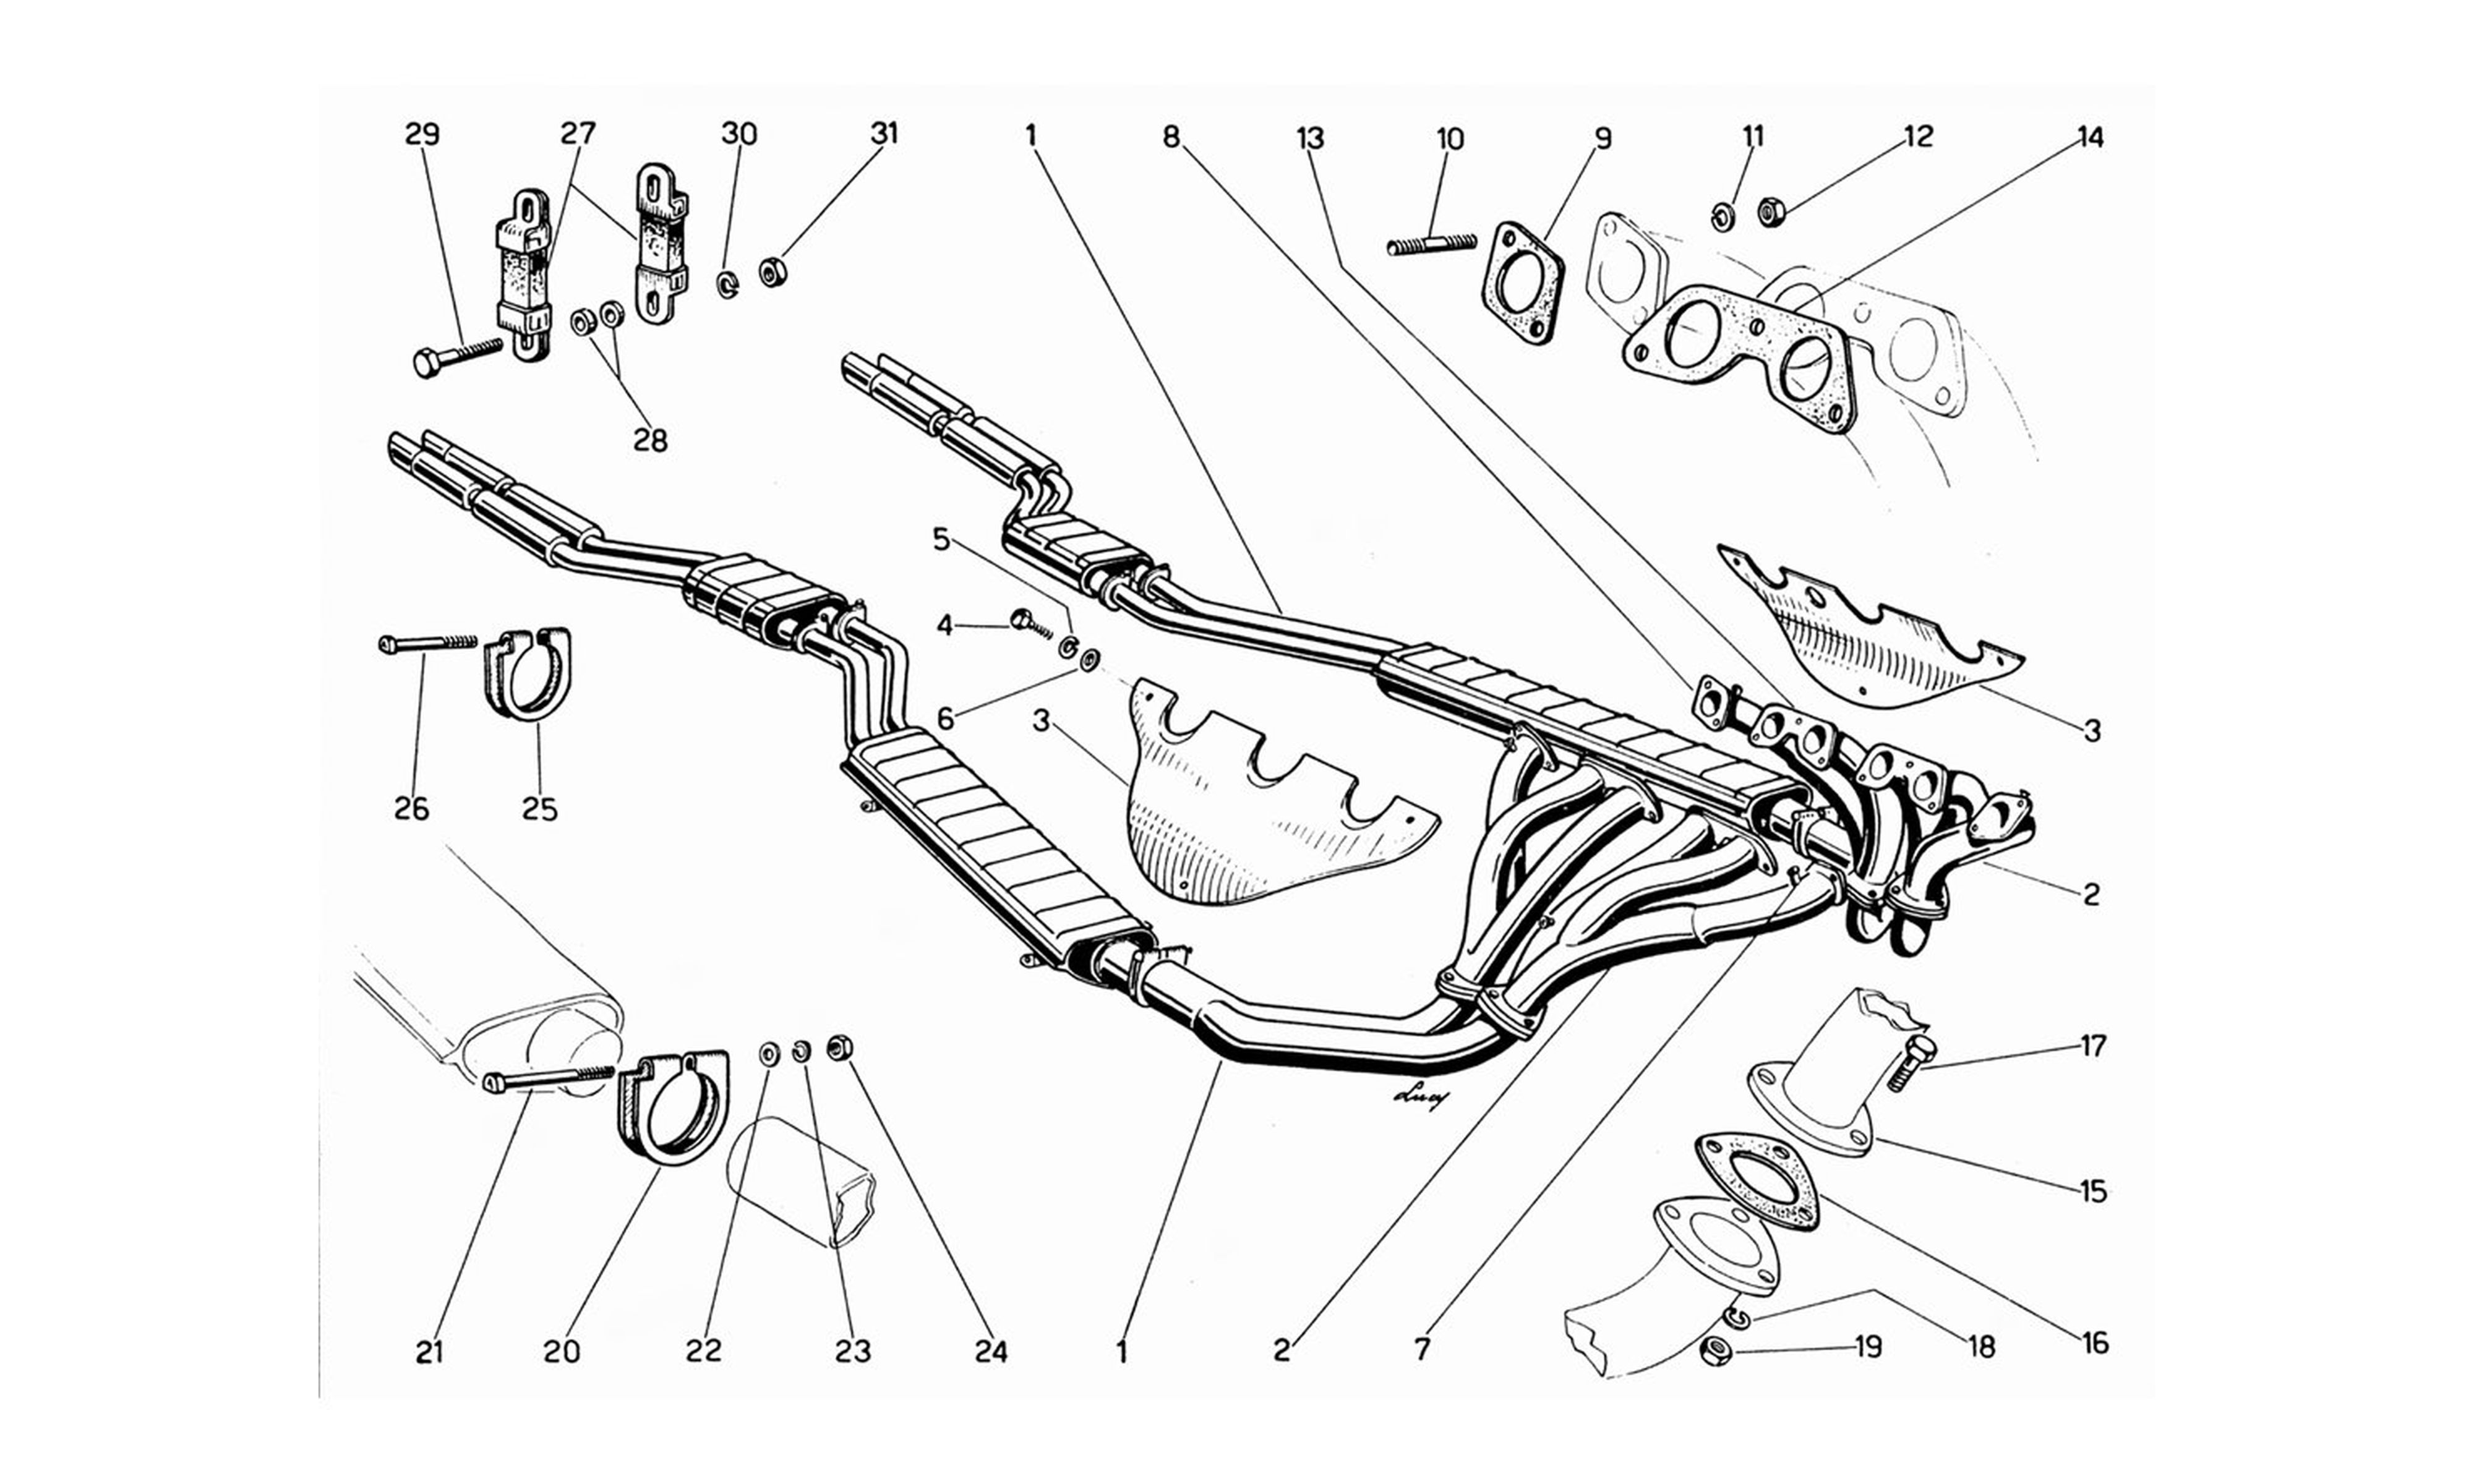 Schematic: Exhaust Manifolds, Silencers & Extensions